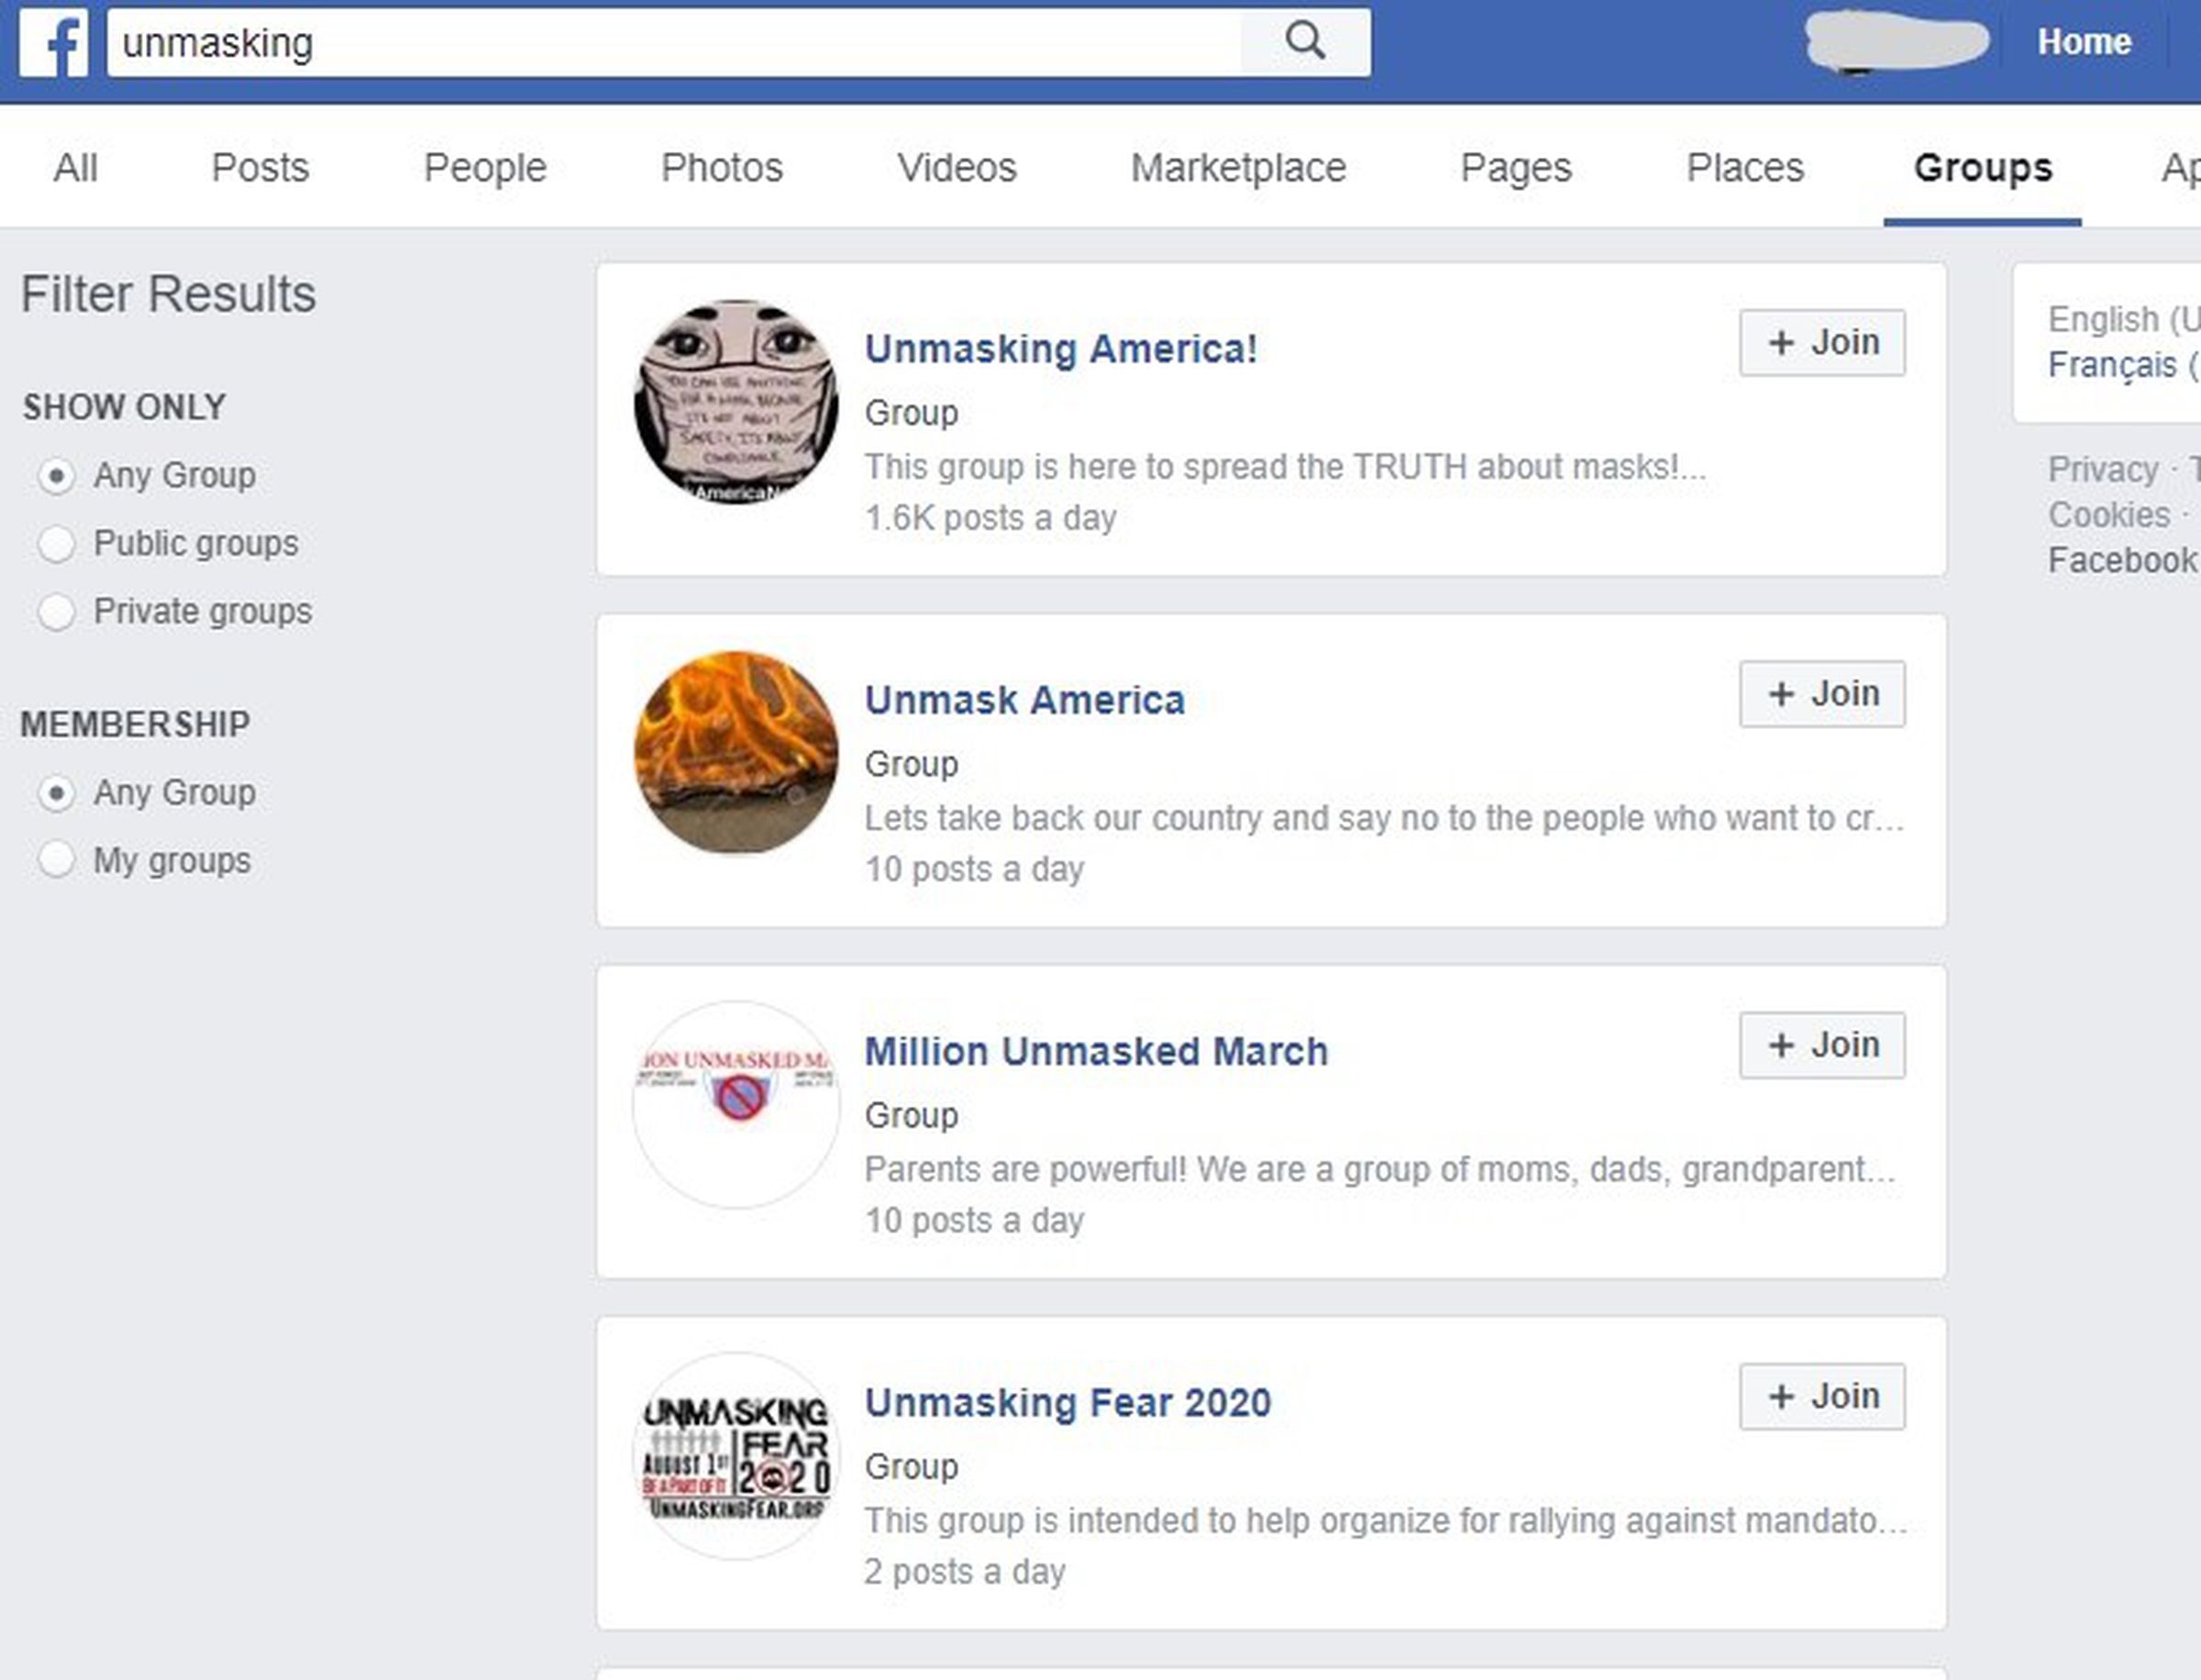 Some of the anti-mask groups on Facebook